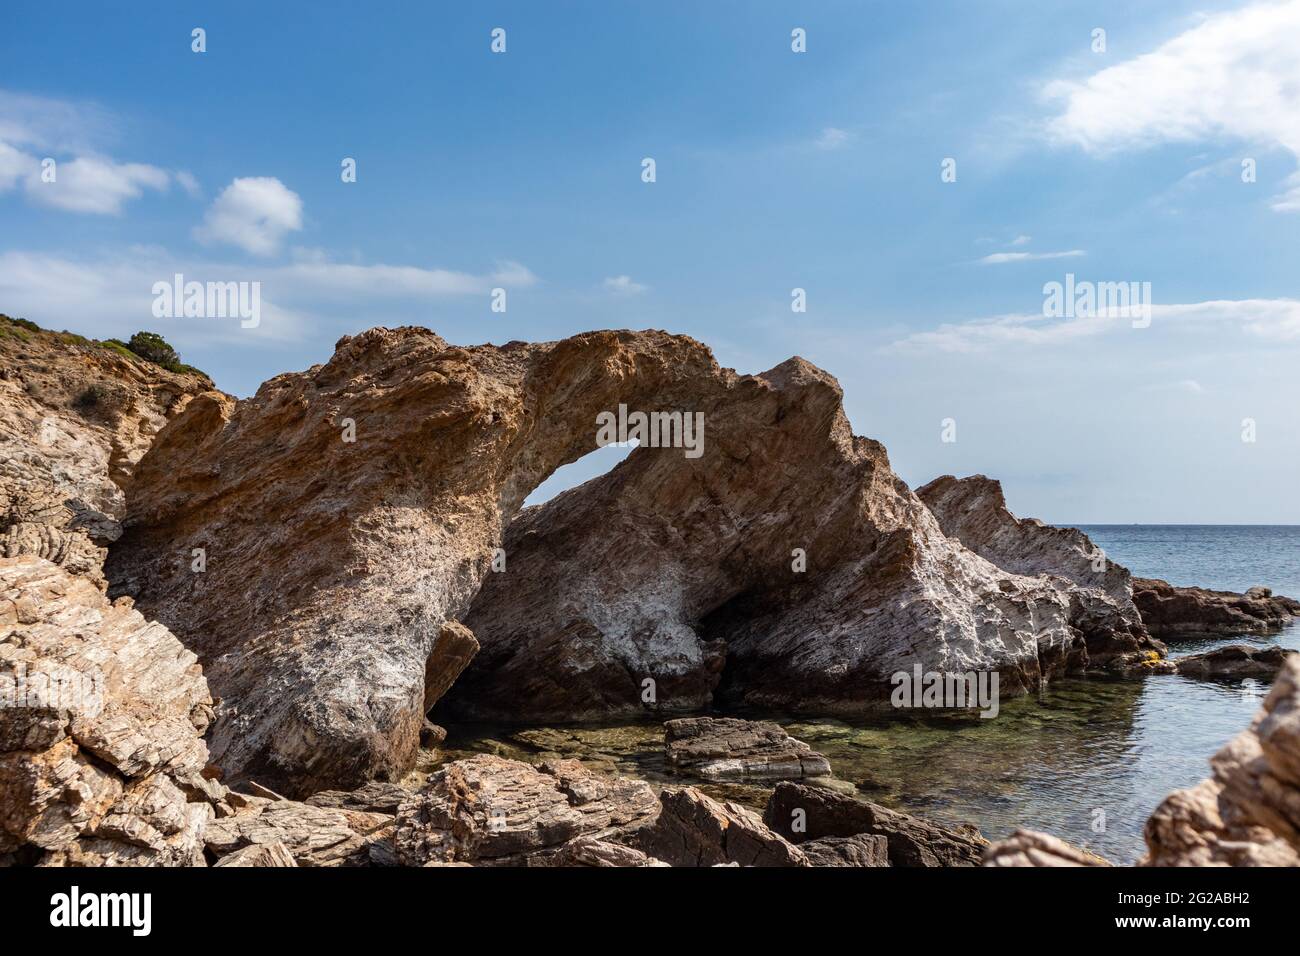 Big rock with a hole on wild mediterranean sea shore with crystal clear water. Travel Greece near Athens. Summer nature scenic lagoon Stock Photo